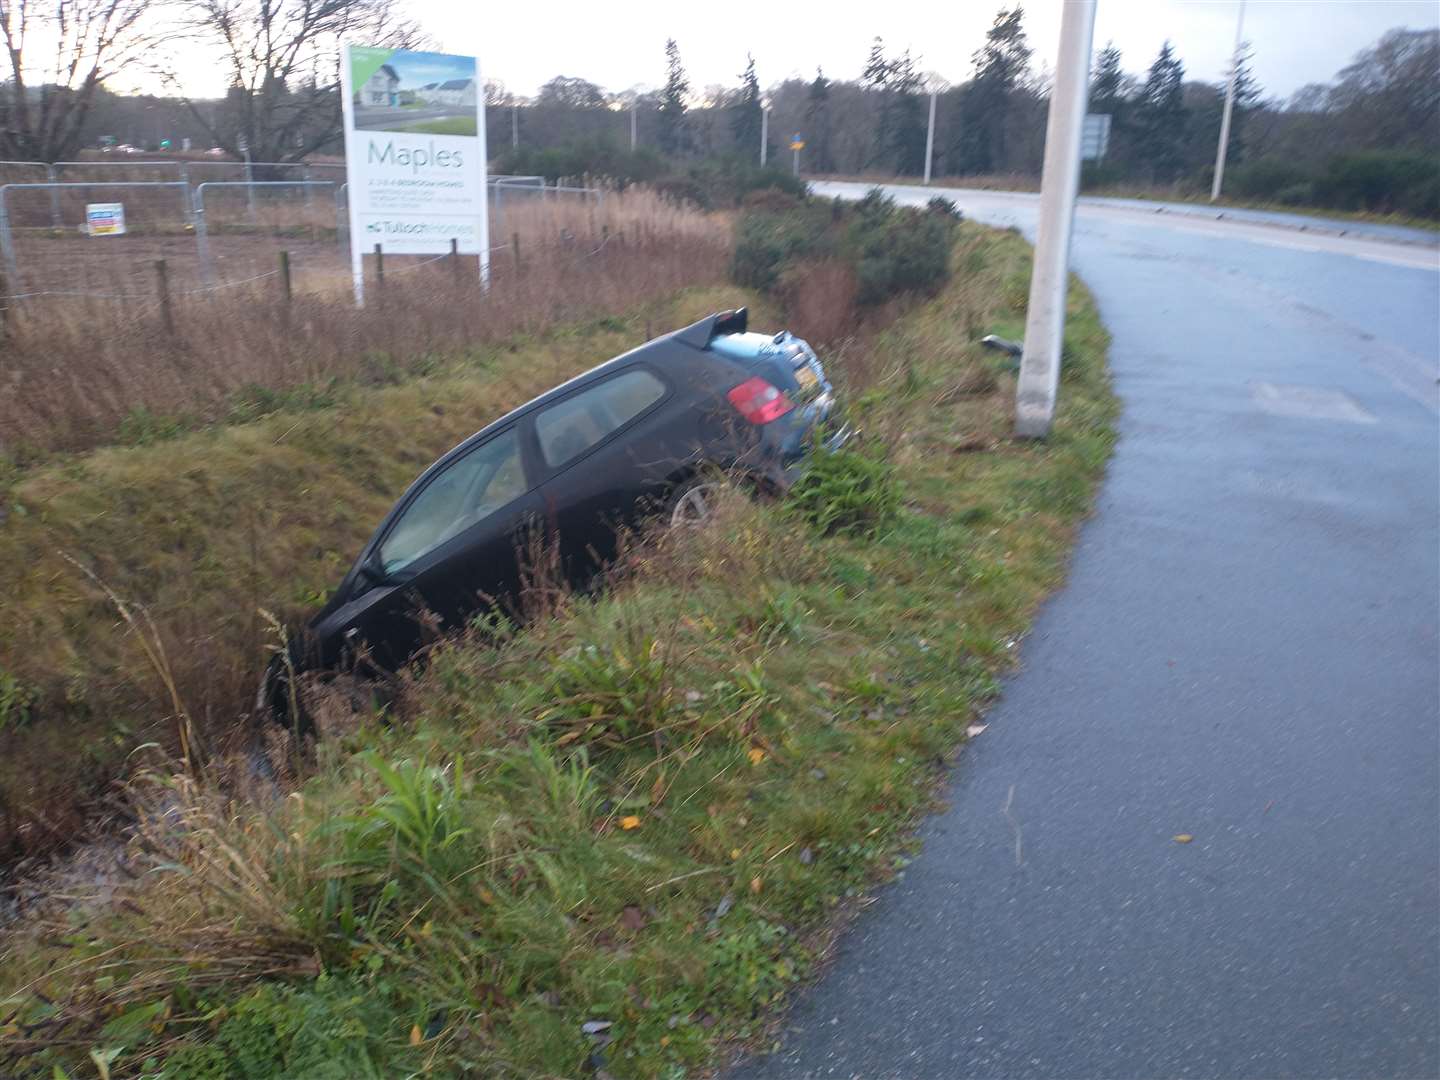 The car in the ditch.